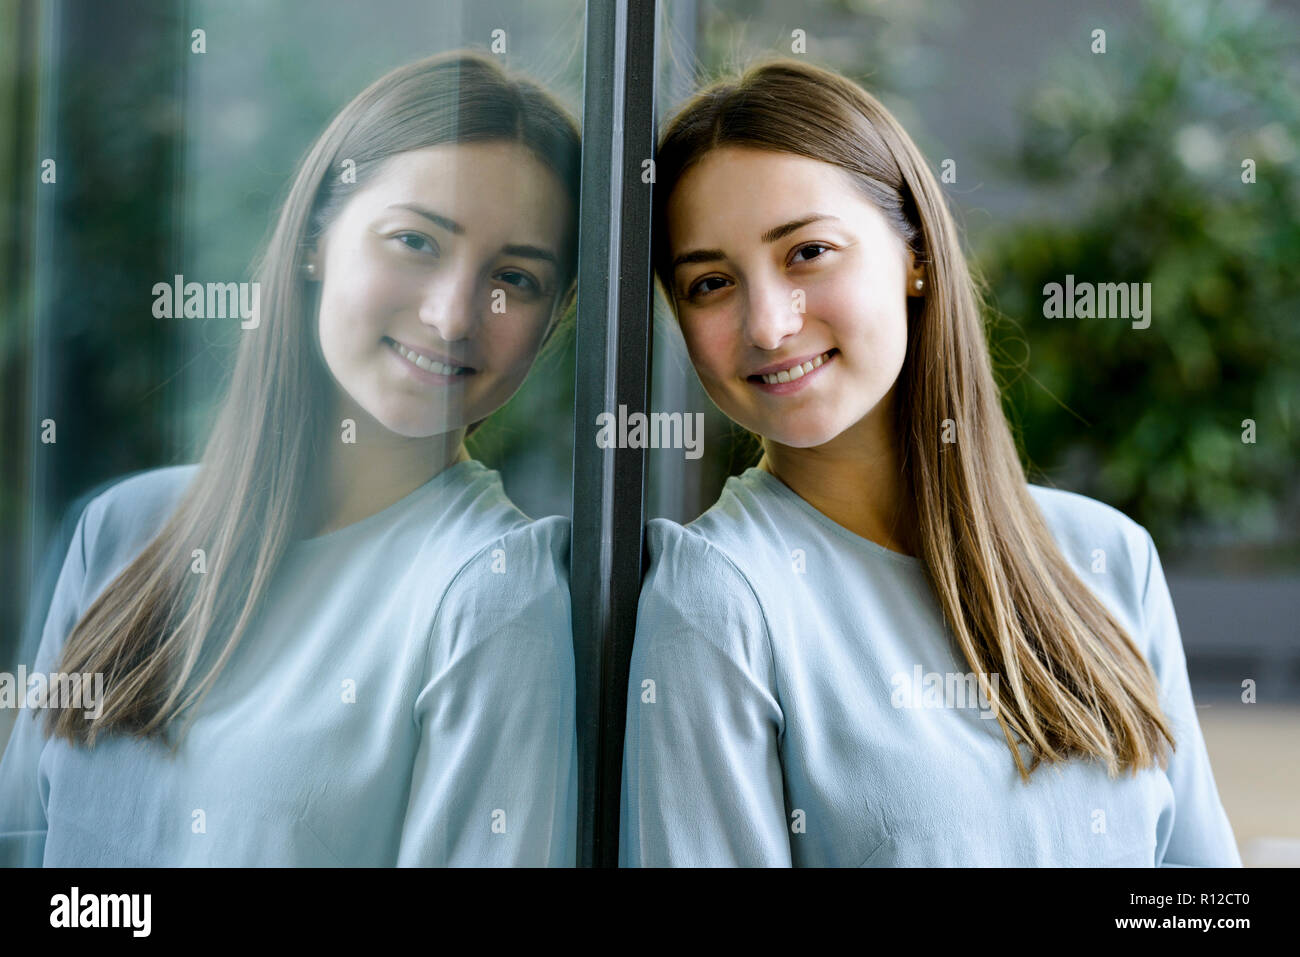 Woman and her mirror reflection on glass wall Stock Photo